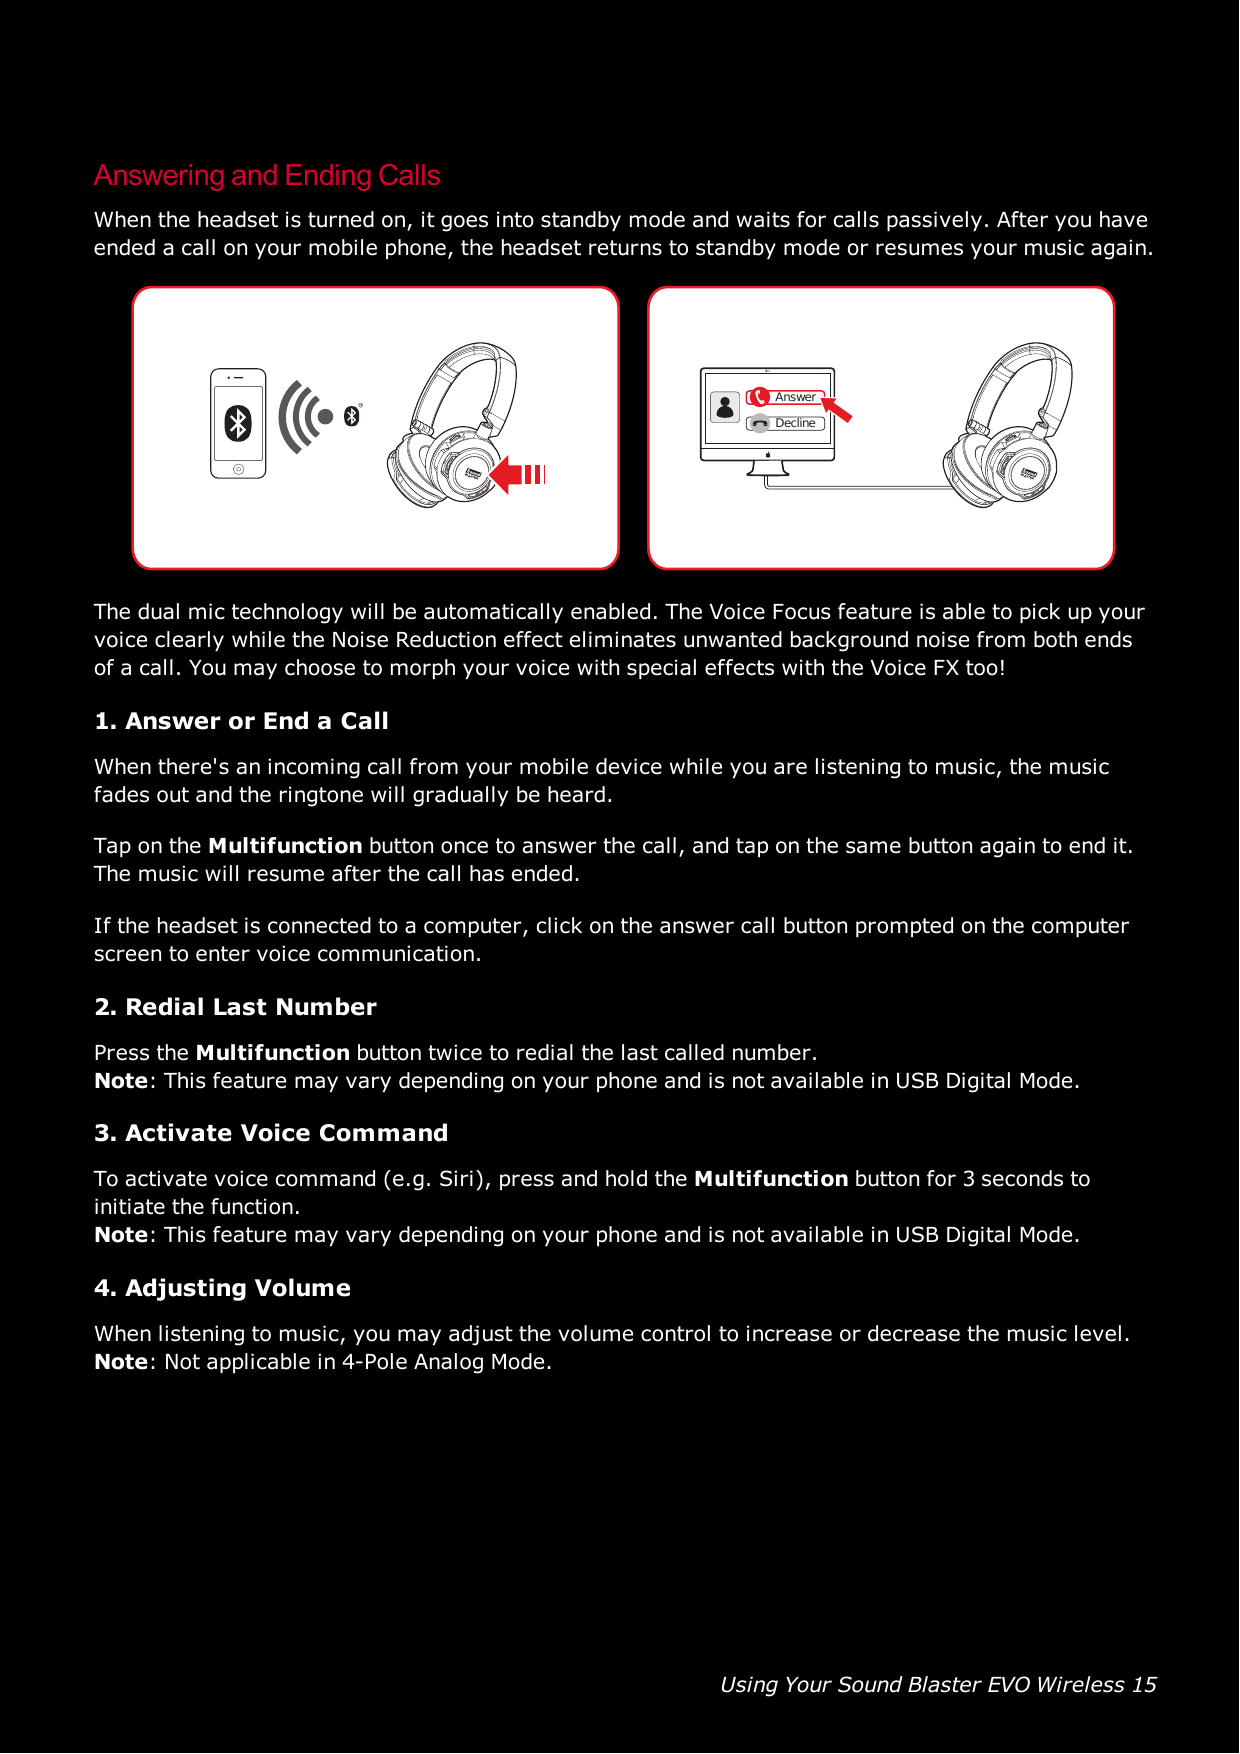 Using Your Sound Blaster EVO Wireless 15Answering and Ending CallsWhen the headset is turned on, it goes into standby mode and waits for calls passively. After you haveended a call on your mobile phone, the headset returns to standby mode or resumes your music again.AnswerDeclineThe dual mic technology will be automatically enabled. The Voice Focus feature is able to pick up yourvoice clearly while the Noise Reduction effect eliminates unwanted background noise from both endsof a call. You may choose to morph your voice with special effects with the Voice FX too!1. Answer or End a CallWhen there&apos;s an incoming call from your mobile device while you are listening to music, the musicfades out and the ringtone will gradually be heard.Tap on the Multifunction button once to answer the call, and tap on the same button again to end it.The music will resume after the call has ended.If the headset is connected to a computer, click on the answer call button prompted on the computerscreen to enter voice communication.2. Redial Last NumberPress the Multifunction button twice to redial the last called number.Note: This feature may vary depending on your phone and is not available in USB Digital Mode.3. Activate Voice CommandTo activate voice command (e.g. Siri), press and hold the Multifunction button for 3 seconds toinitiate the function.Note: This feature may vary depending on your phone and is not available in USB Digital Mode.4. Adjusting VolumeWhen listening to music, you may adjust the volume control to increase or decrease the music level.Note: Not applicable in 4-Pole Analog Mode.